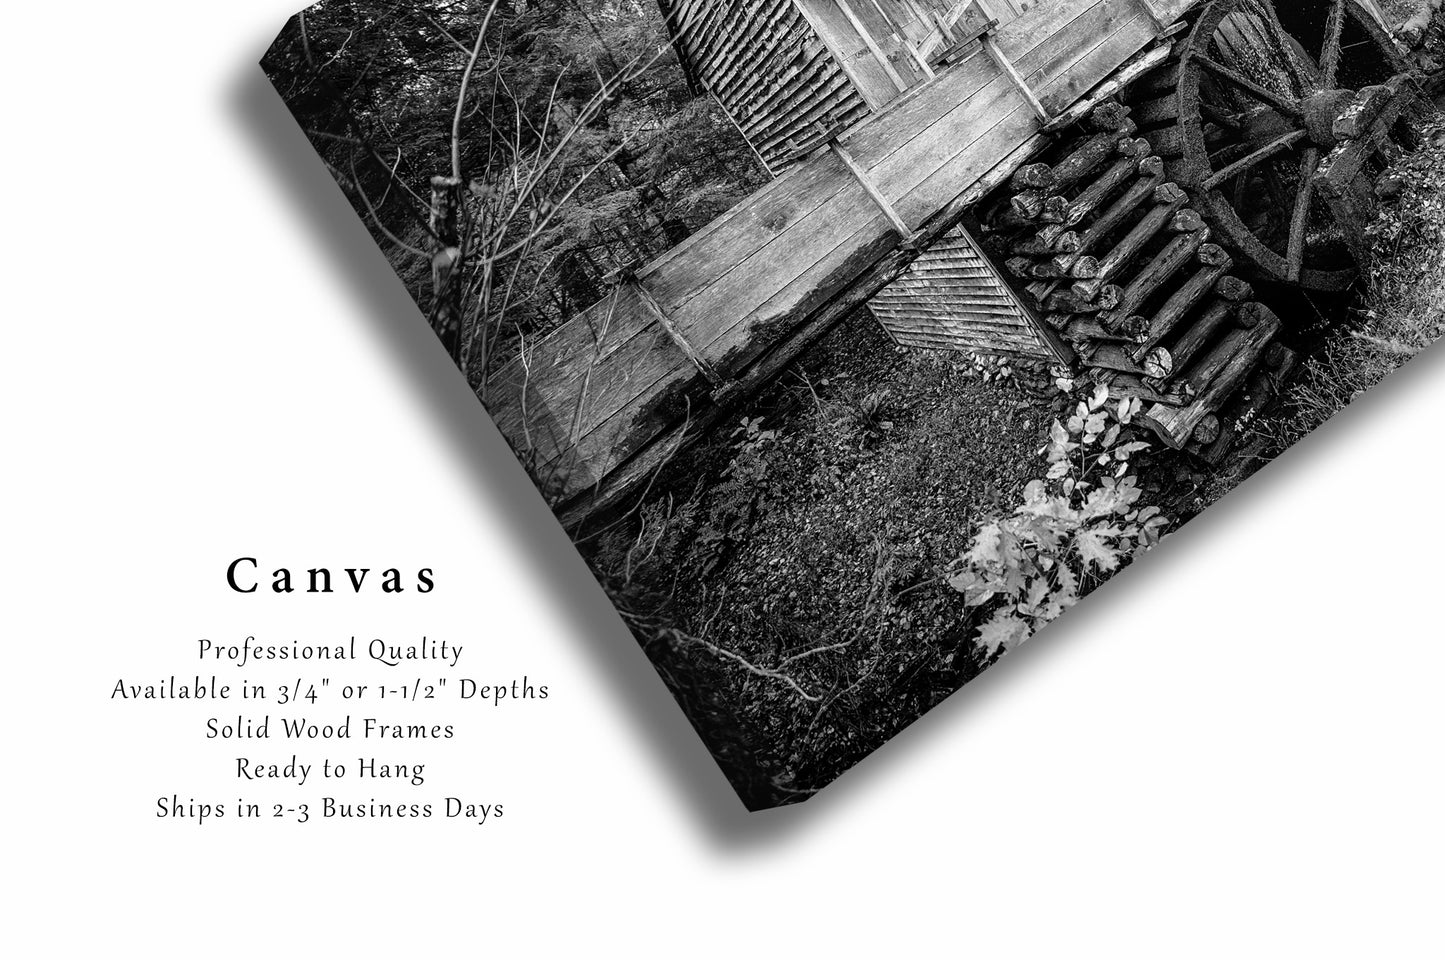 Country Canvas Wall Art (Ready to Hang) Black and White Gallery Wrap of John Cable Mill in Cades Cove Great Smoky Mountains Tennessee Rustic Photography Farmhouse Decor